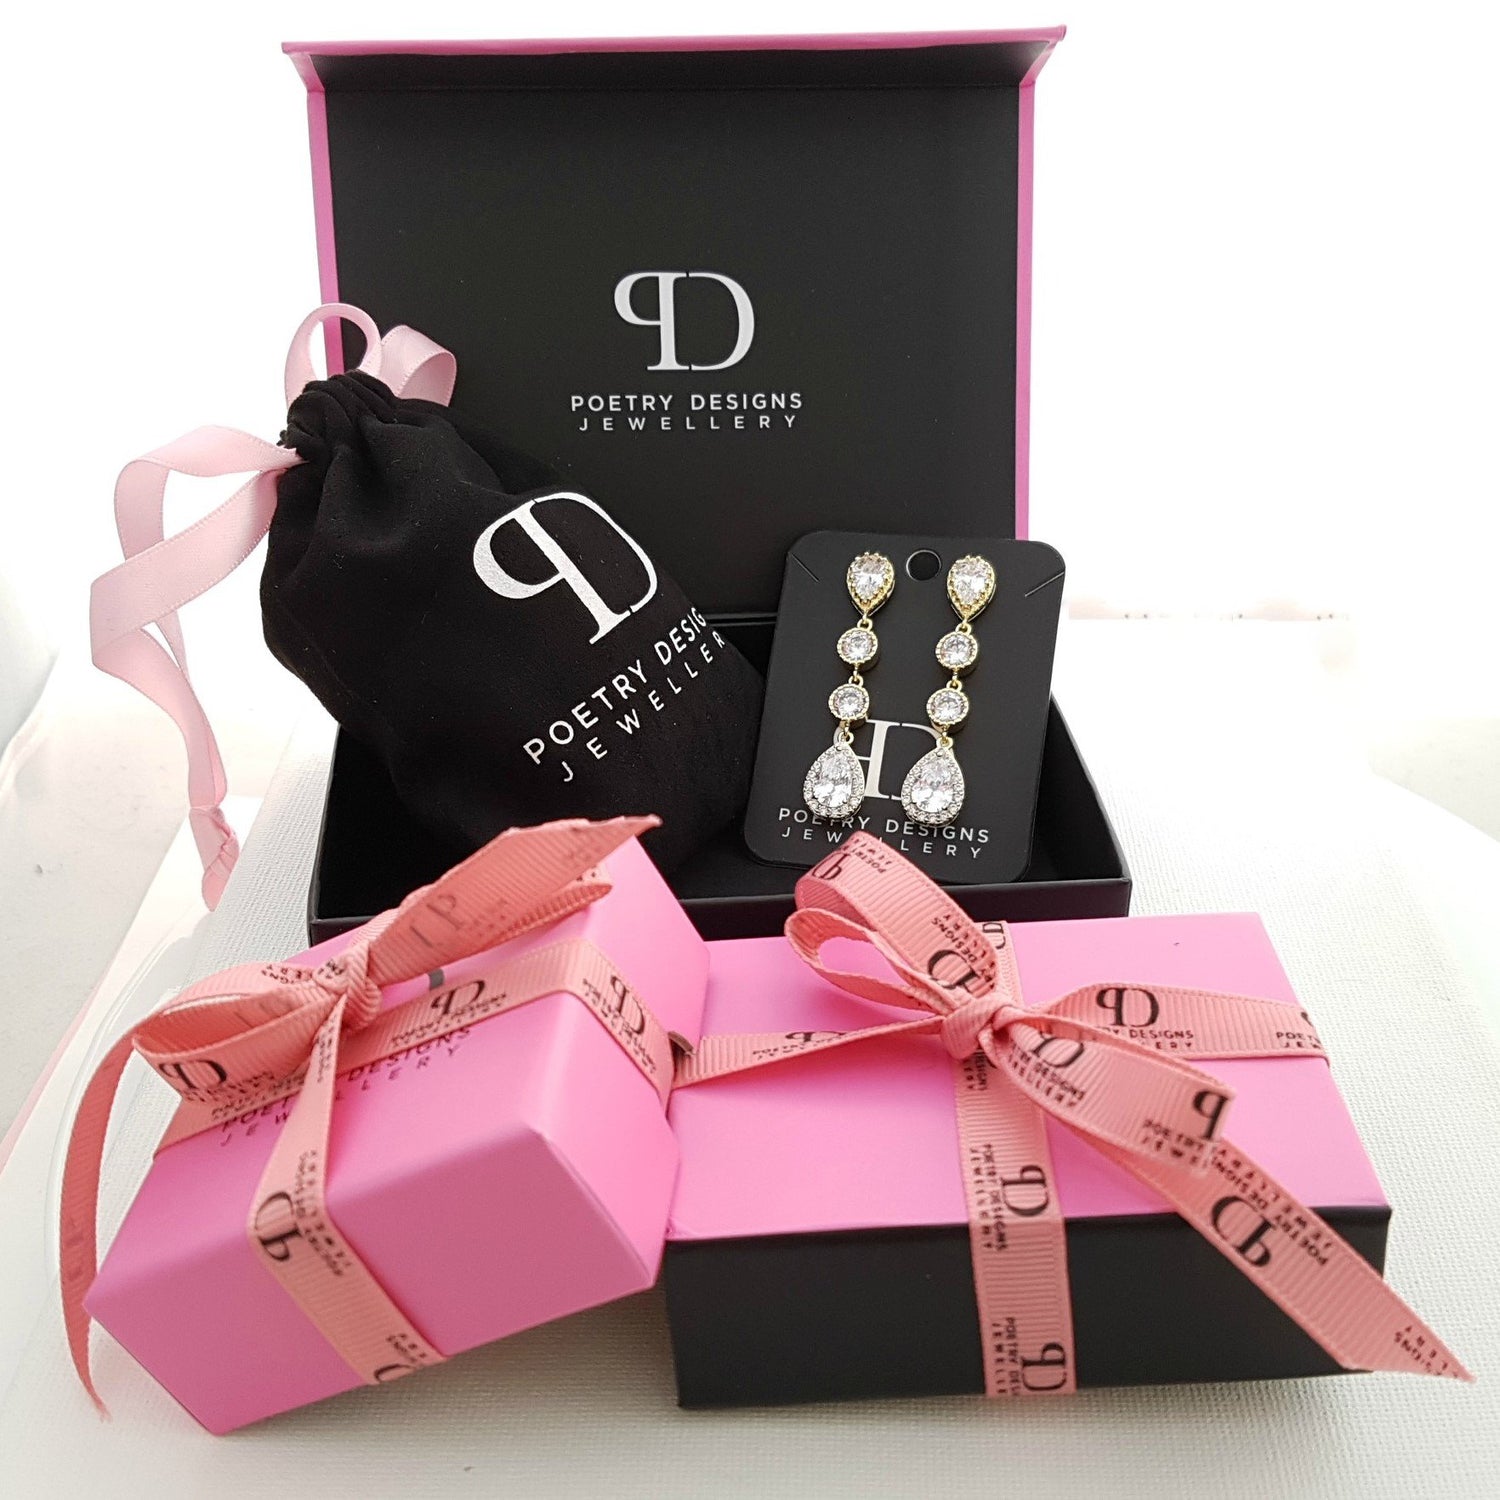 Poetry Designs Necklace & Jewelry Packaging